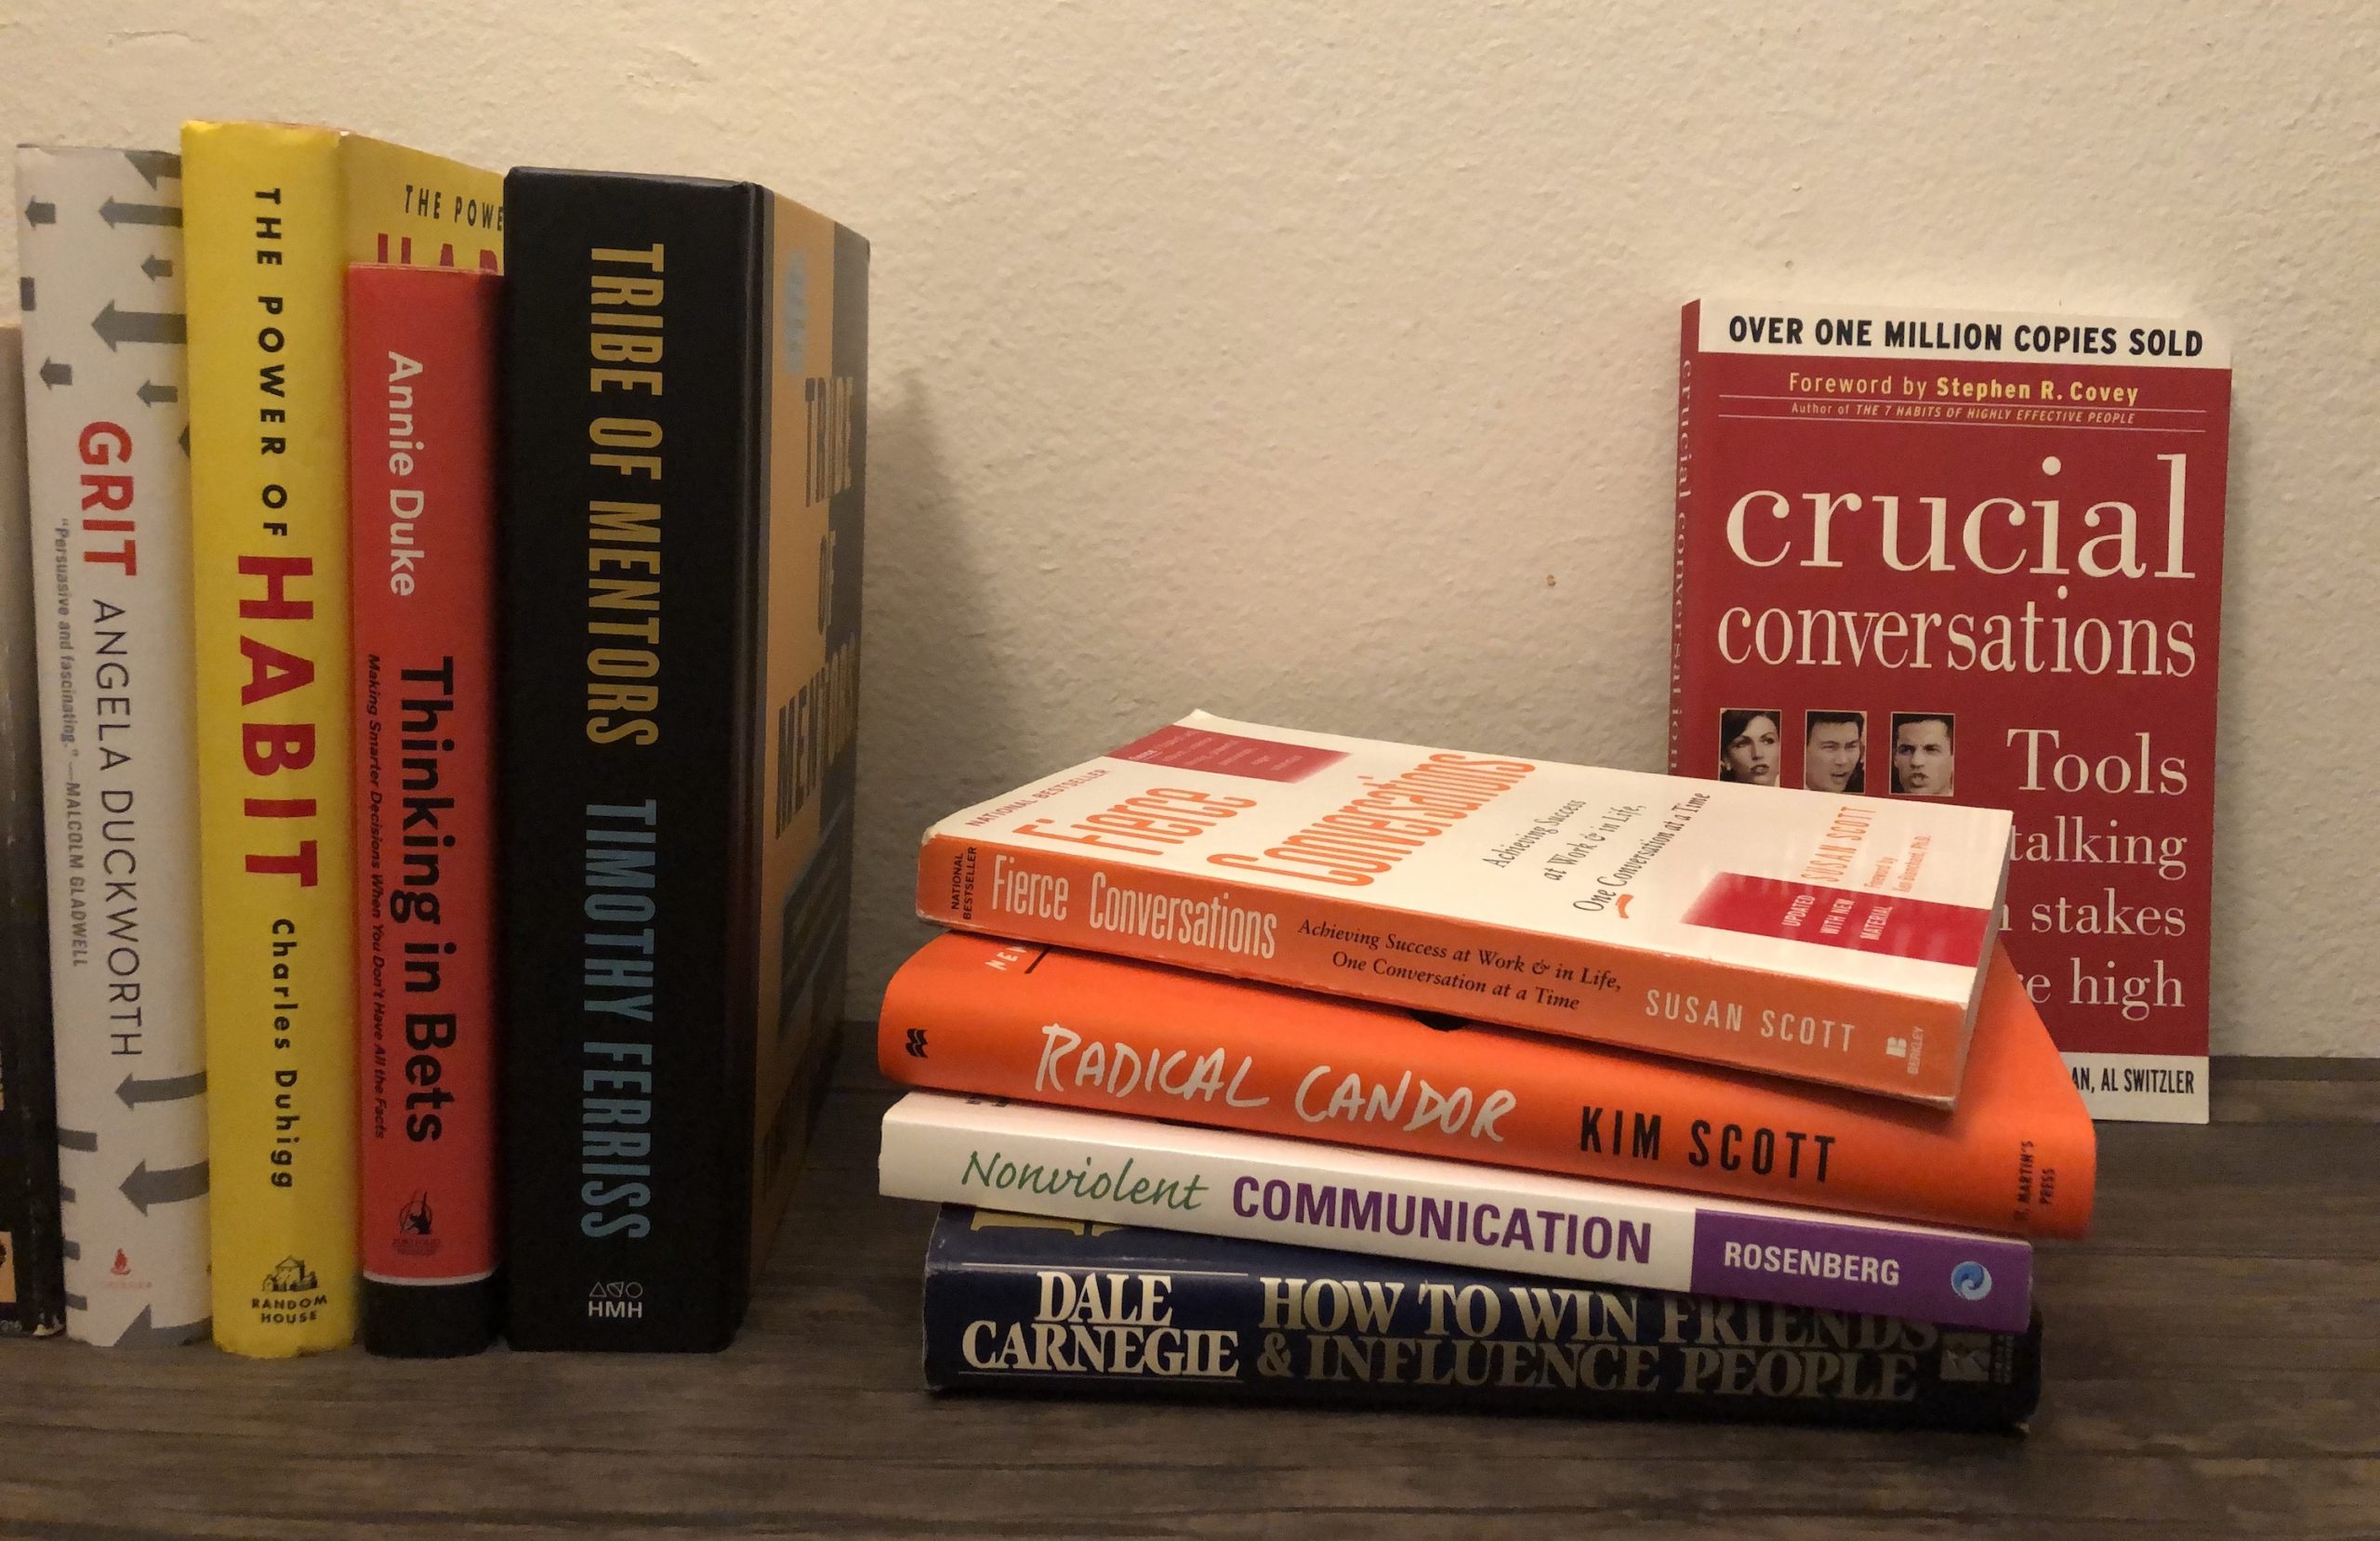 Vurdering Rustik Premonition The 7 Best Books on How to Give Feedback - BobbyPowers.net